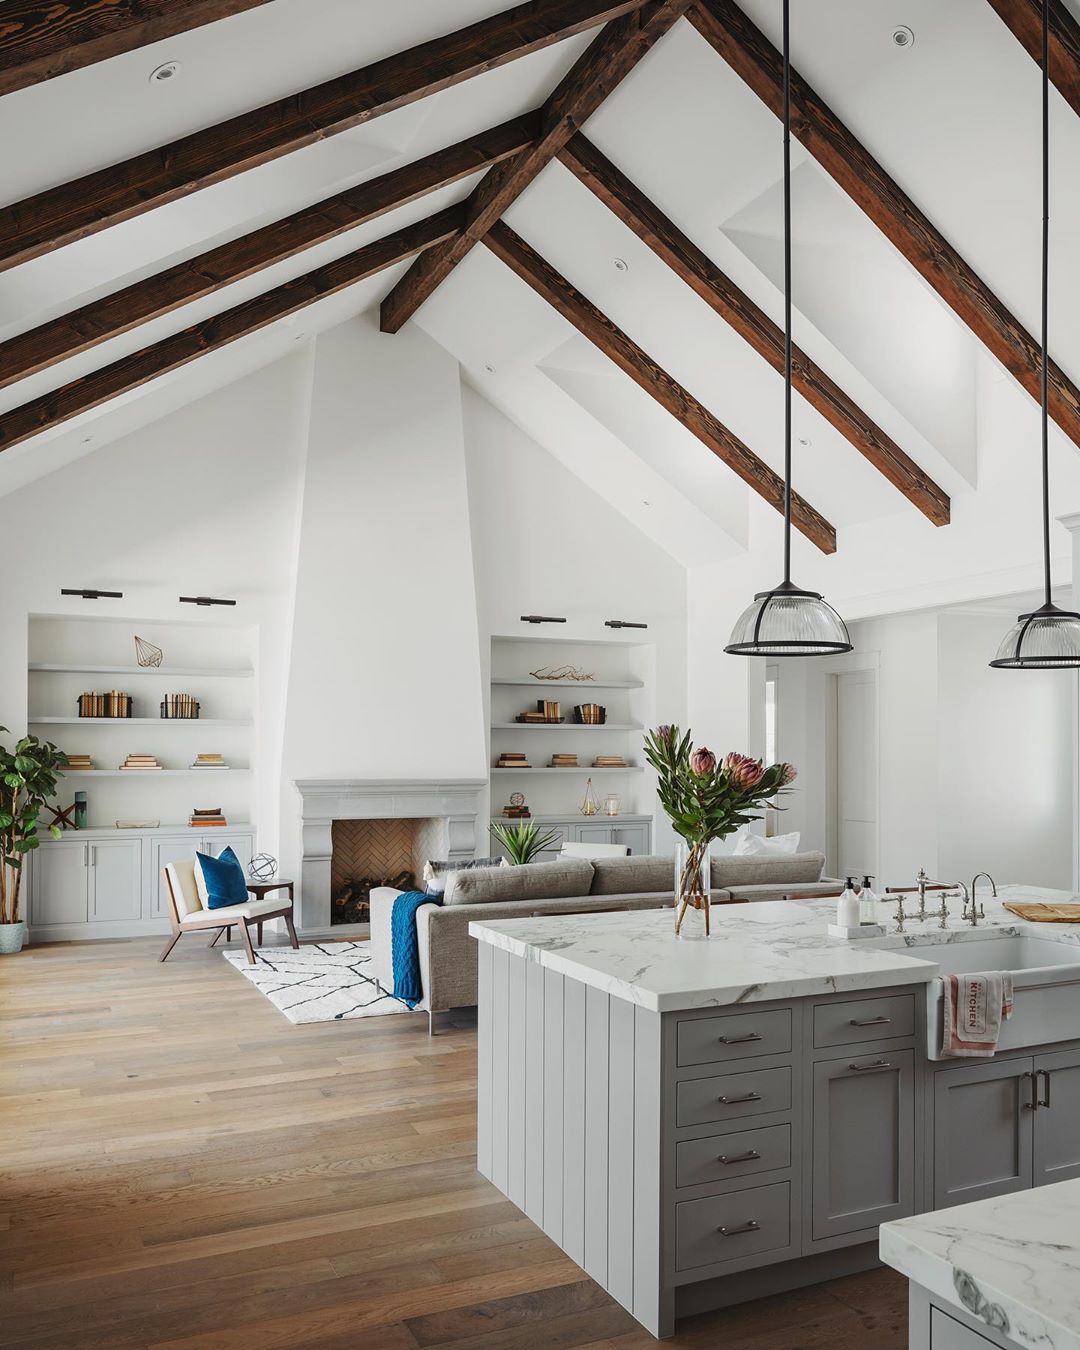 vaulted ceiling over living room and kitchen with wooden beams photo by Instagram user @roehnerryan